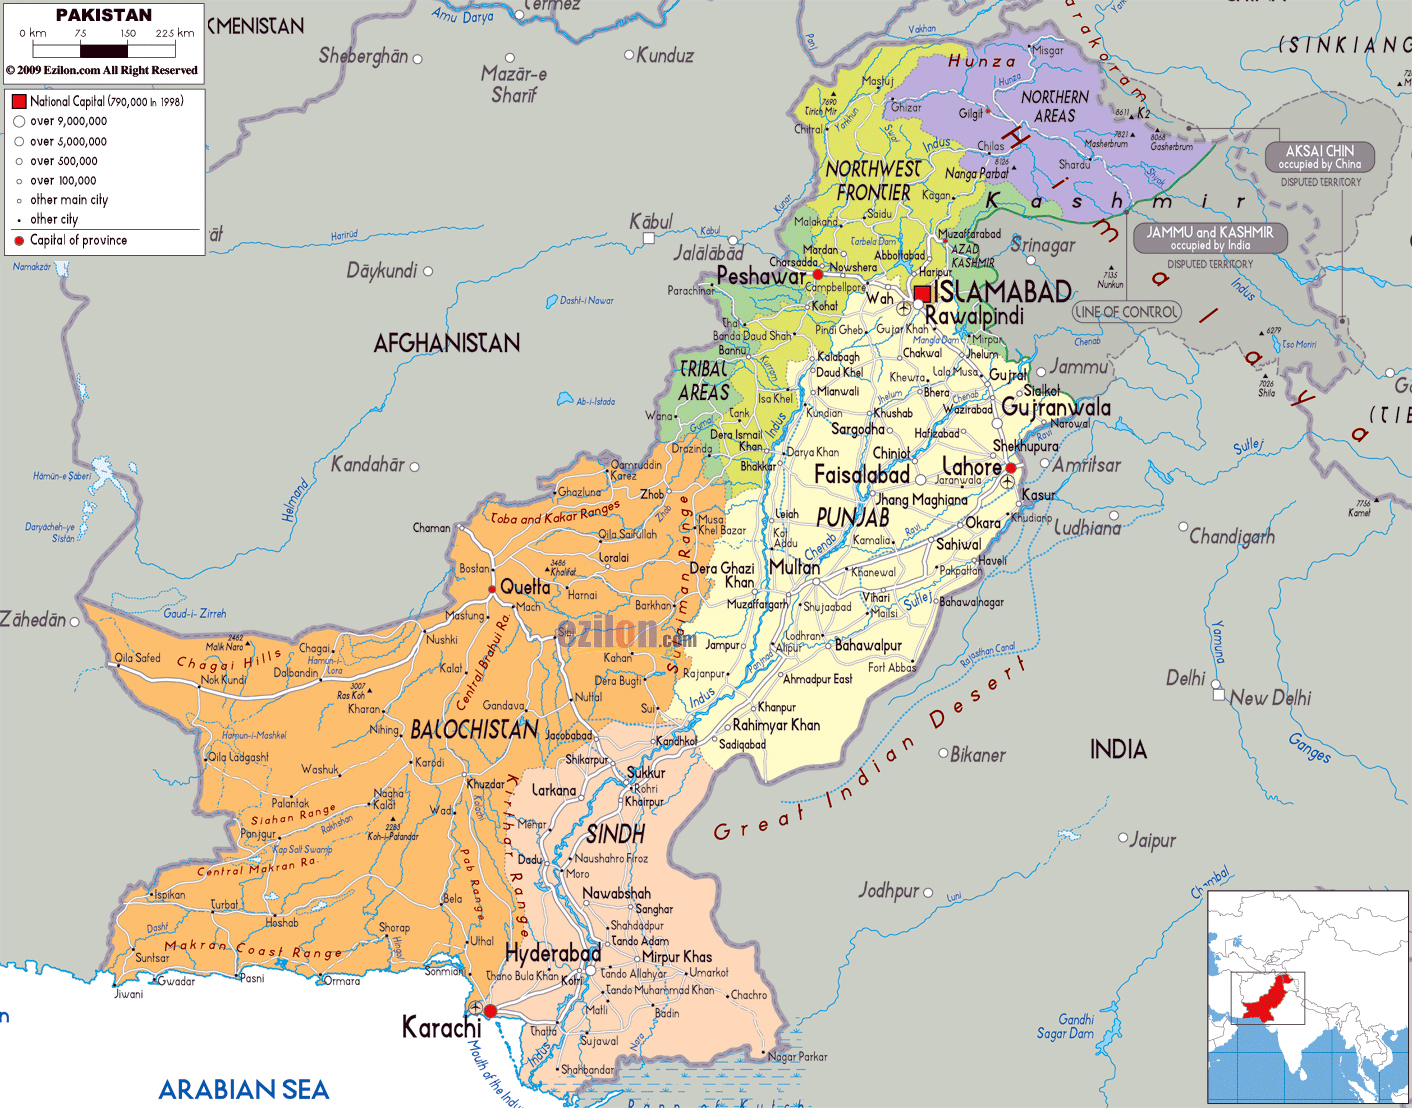 Large Detailed Political And Administrative Map Of Pakistan With Roads ...